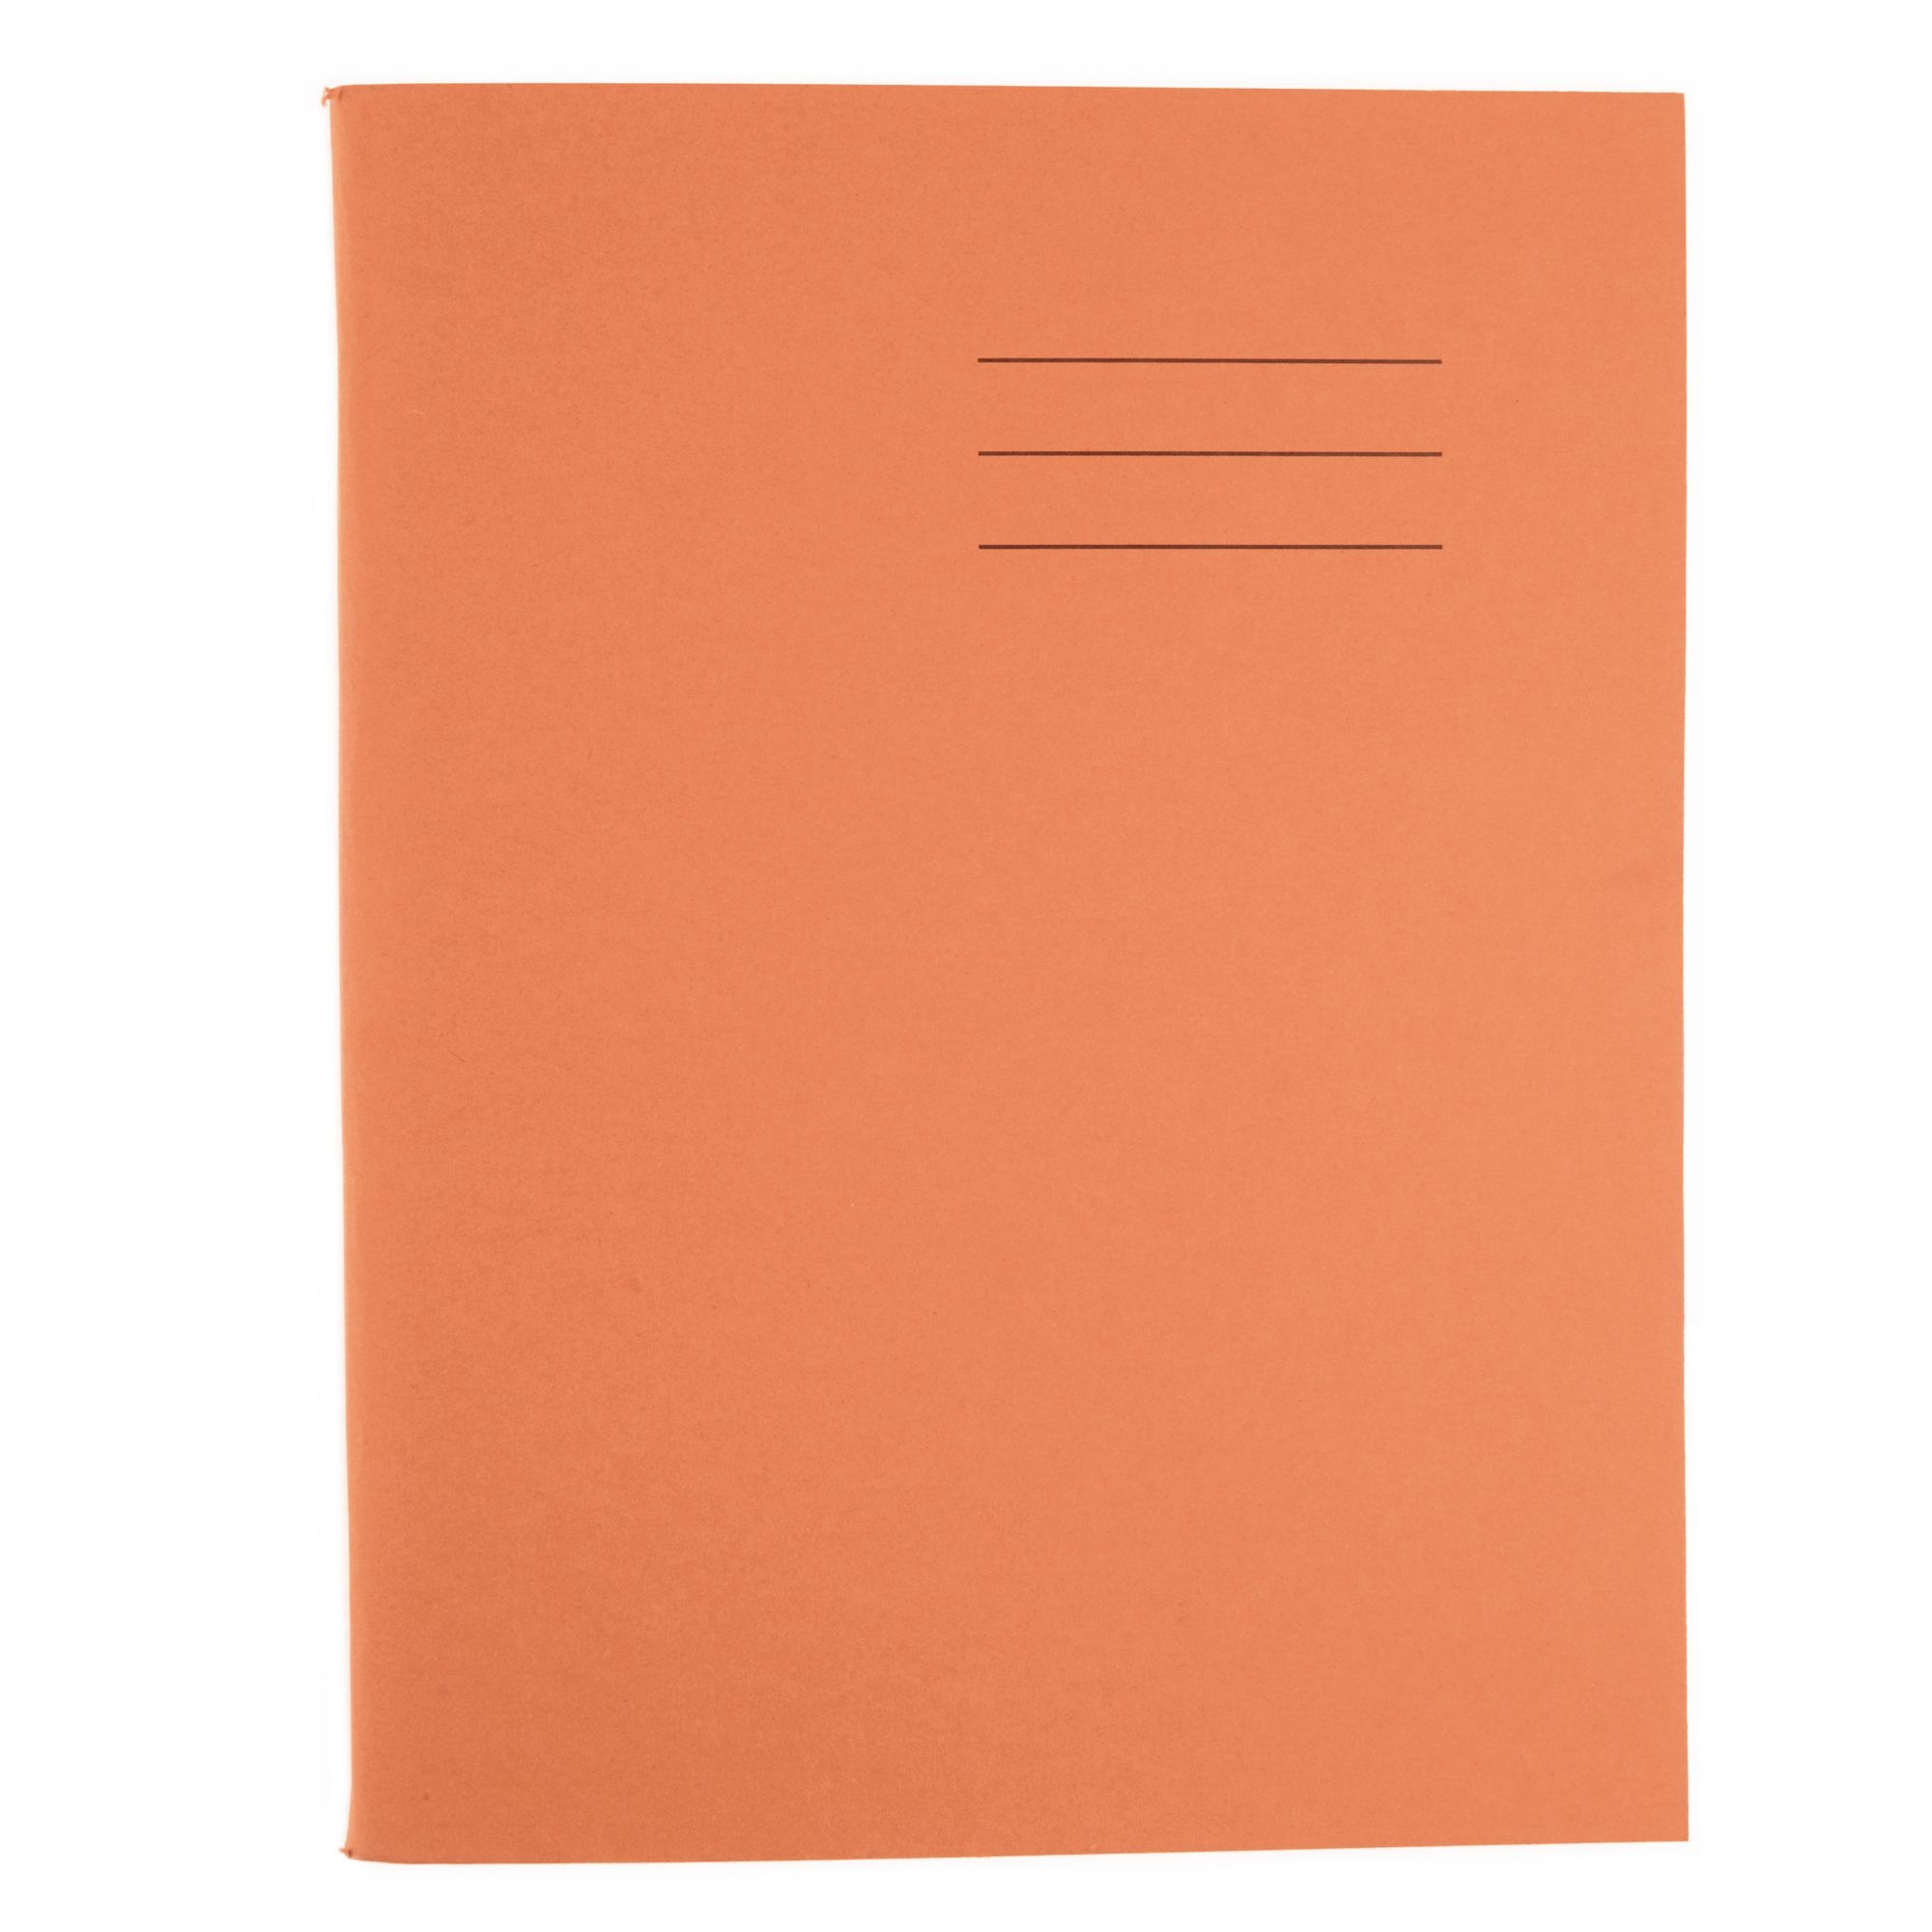 9x7 Exercise Book 48 Page, 8mm Ruled with Margin, Orange - Pack of 100